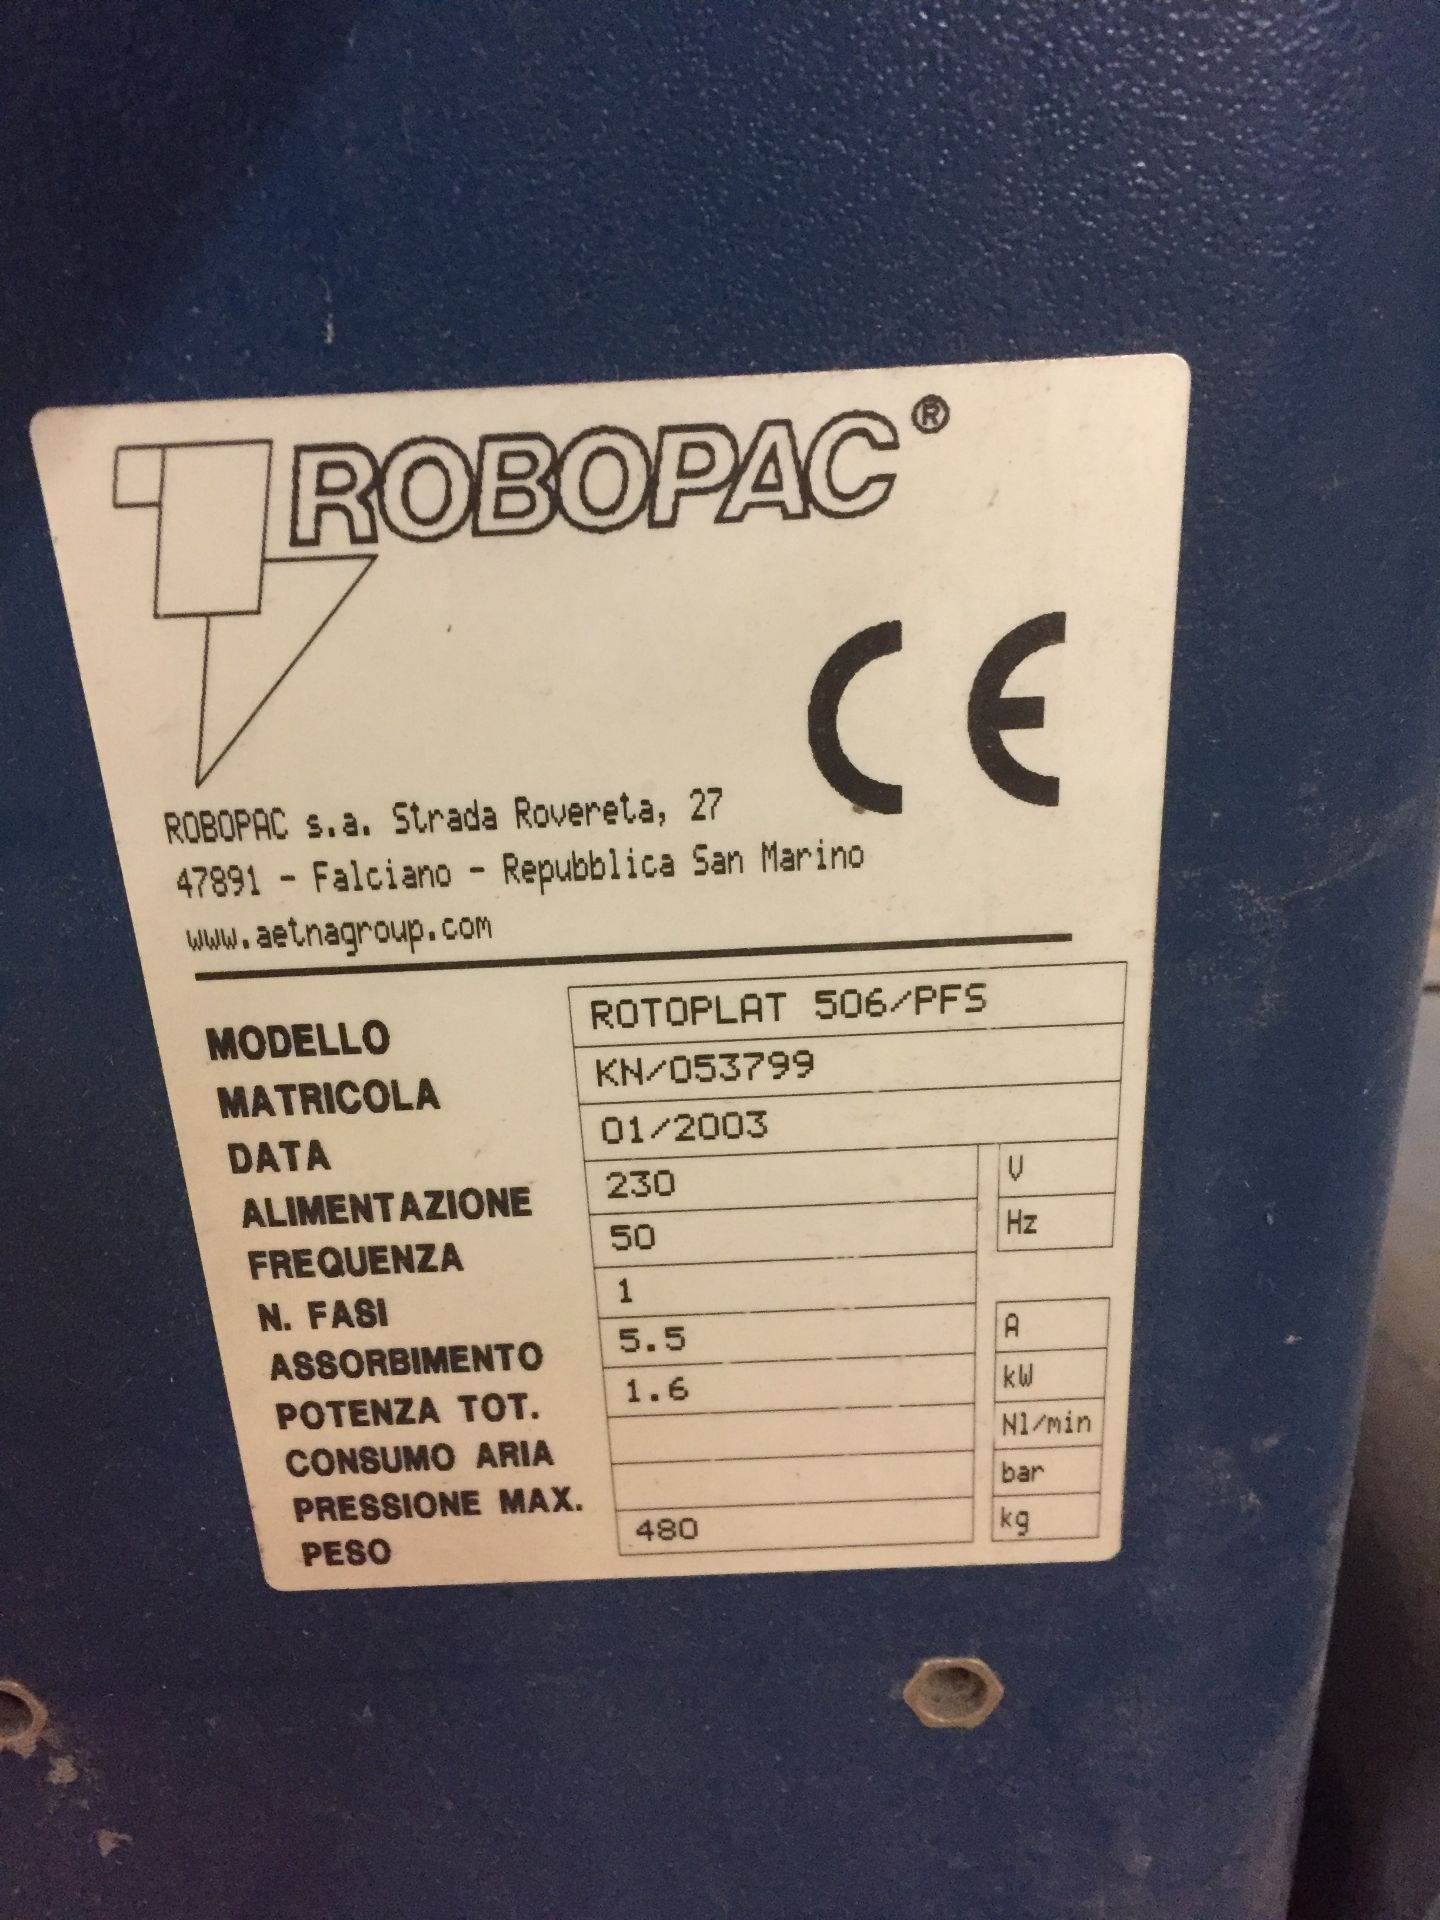 Robopac Rotoplat 506/PFS pallet wrapping machine, Serial No. KN/053799 (2003) **This lot is - Image 3 of 3